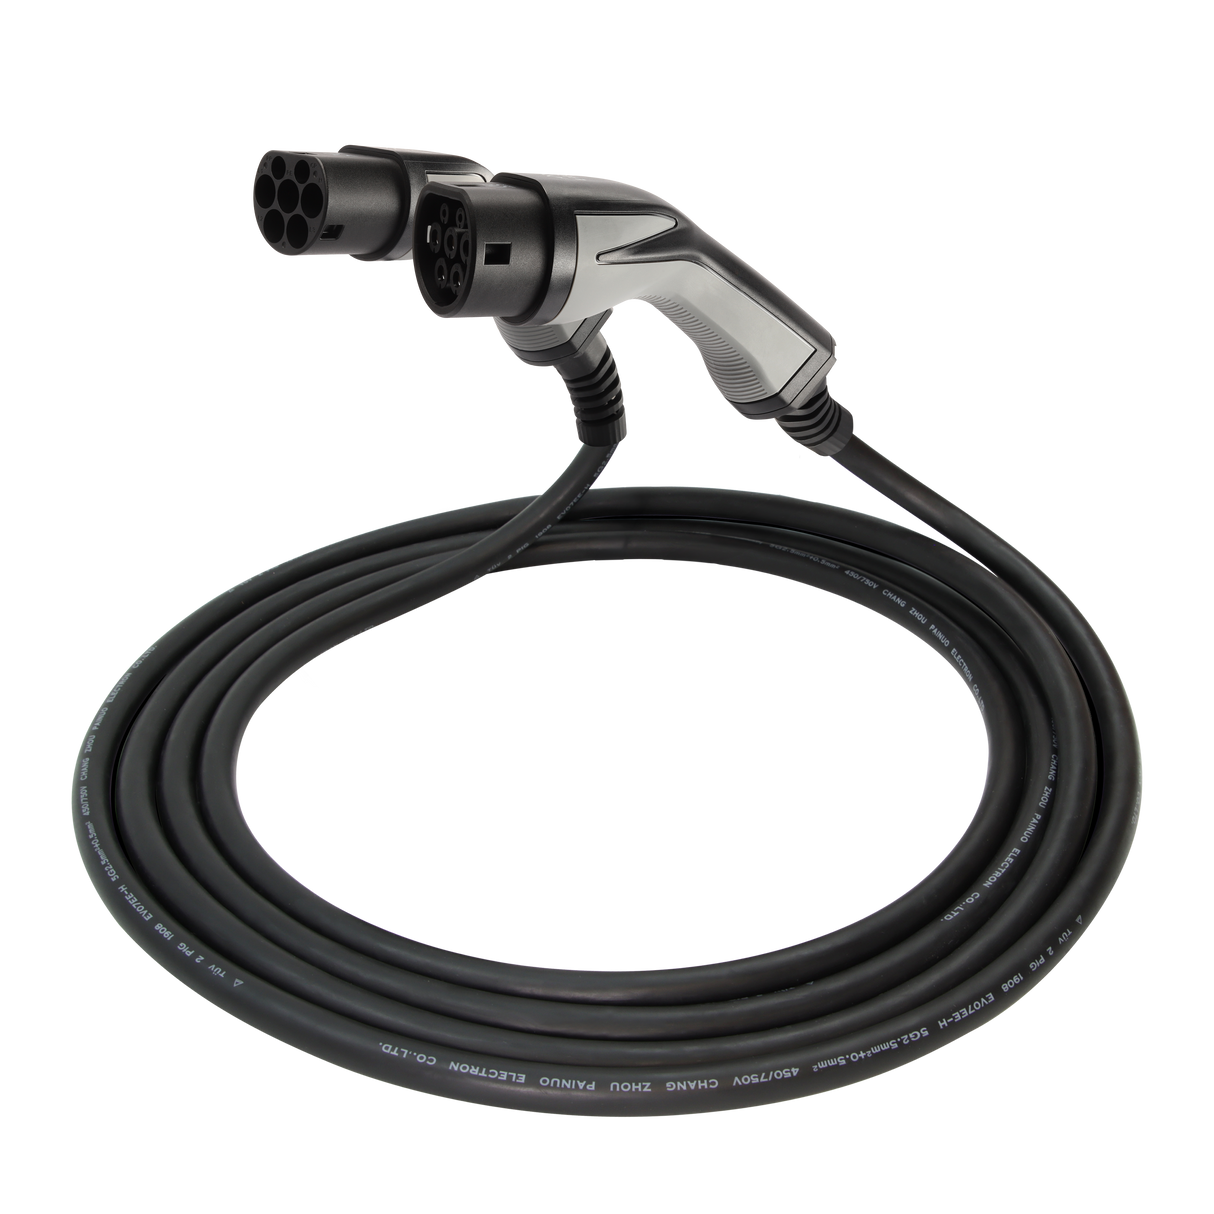 Charging cable Kia Ceed Sportswagon - Erock Pro Type 2 - 16A 1 phase (3.7 kW)